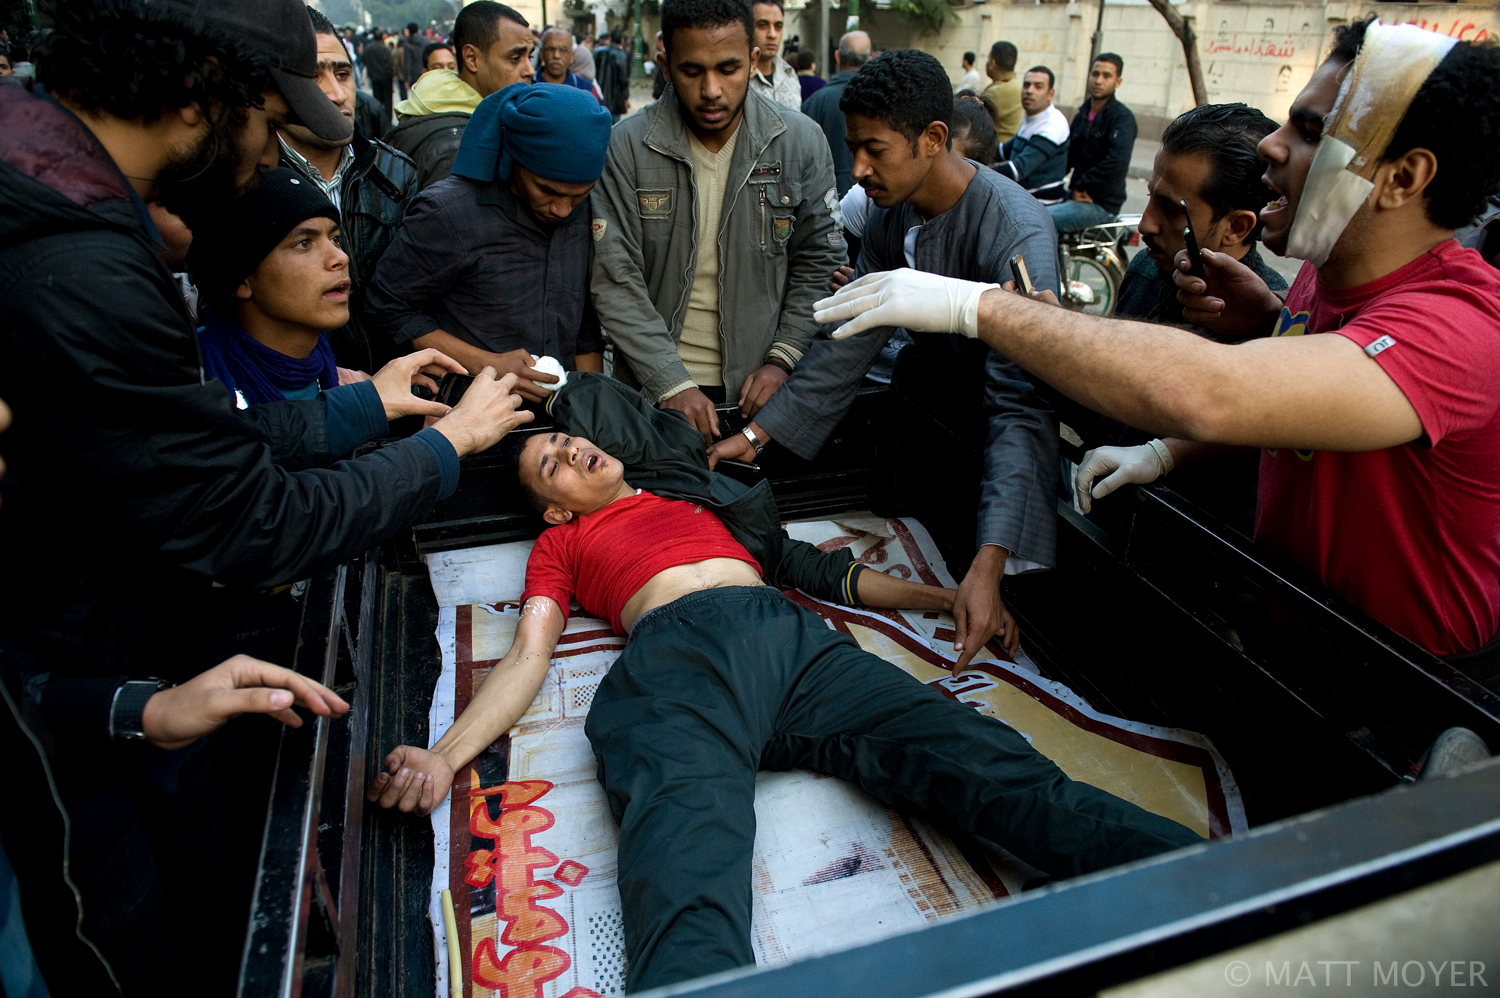  An Egyptian protester is rushed to the hospital after being injured in clashes with government forces in Cairo, Egypt. 